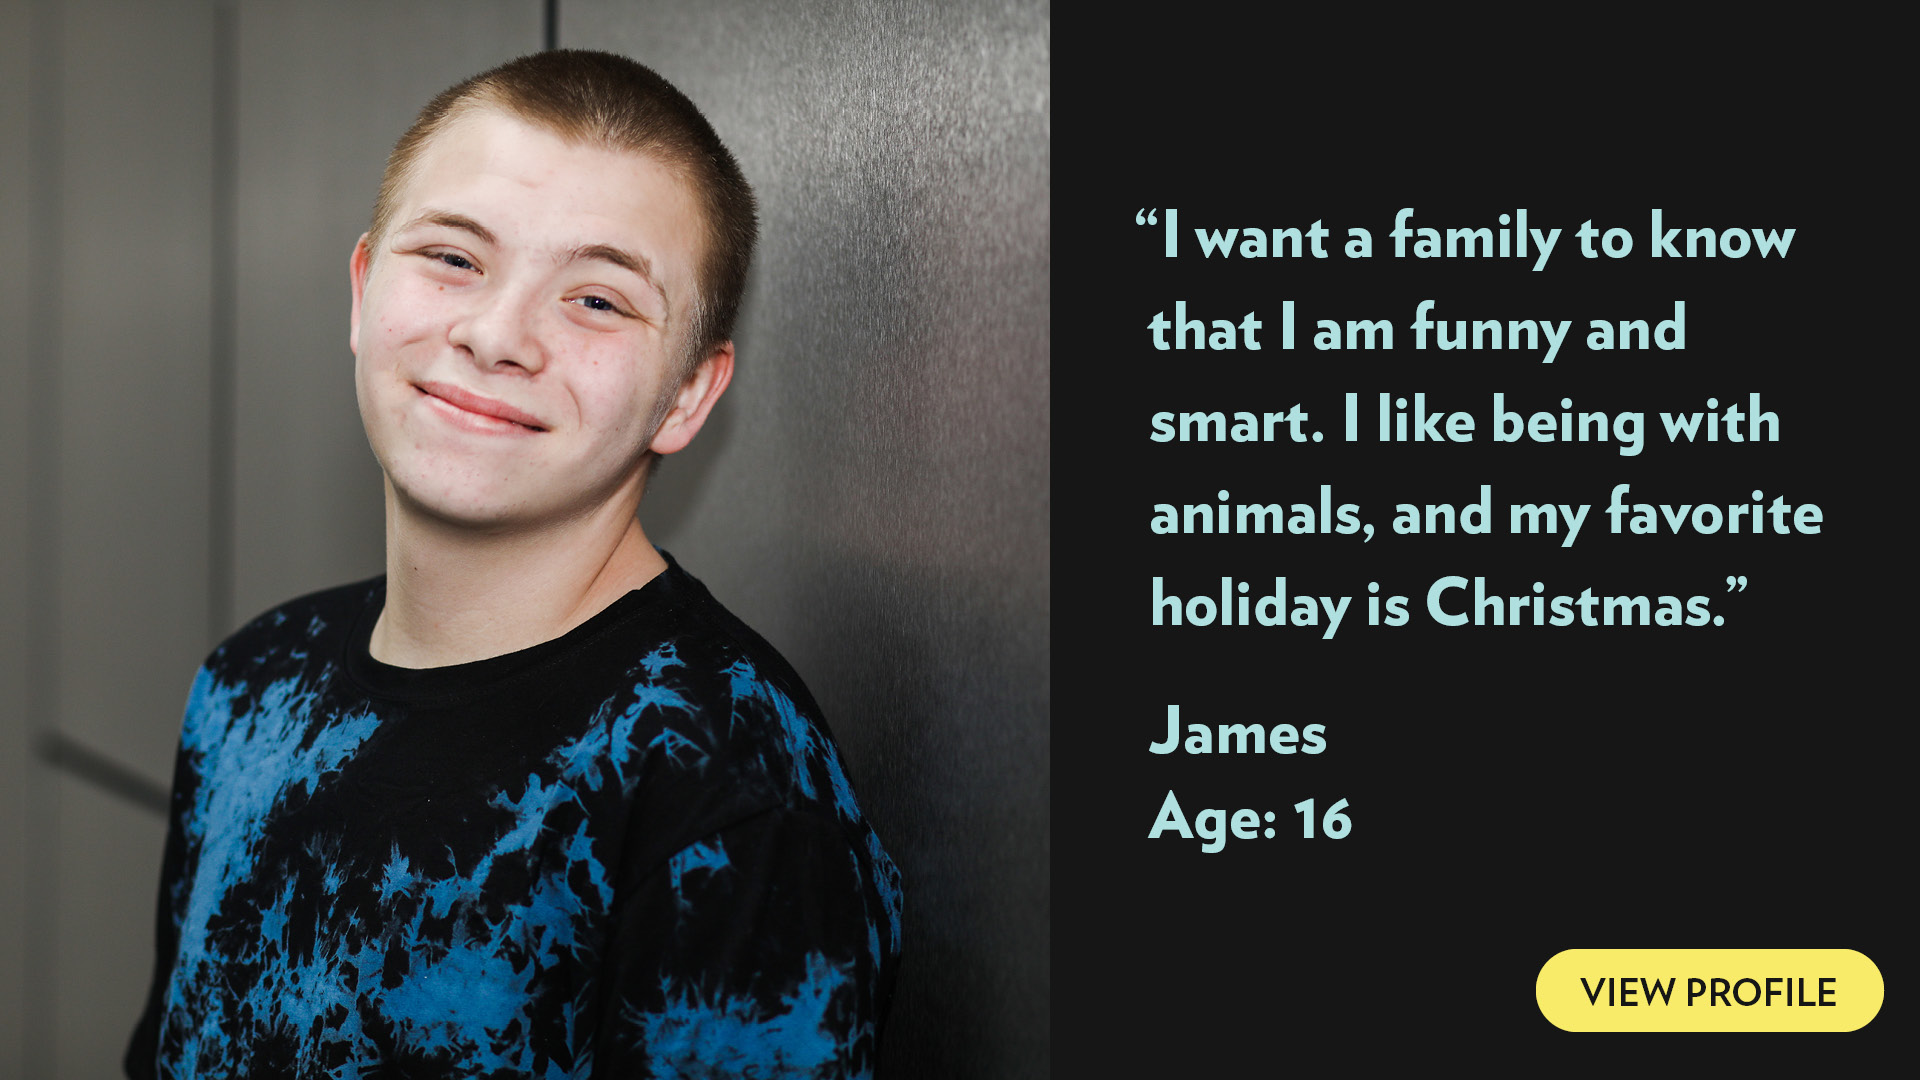 I want a family to know that I am funny and smart. I like being with animals, and my favorite holiday is Christmas. James, age 15. View profile.